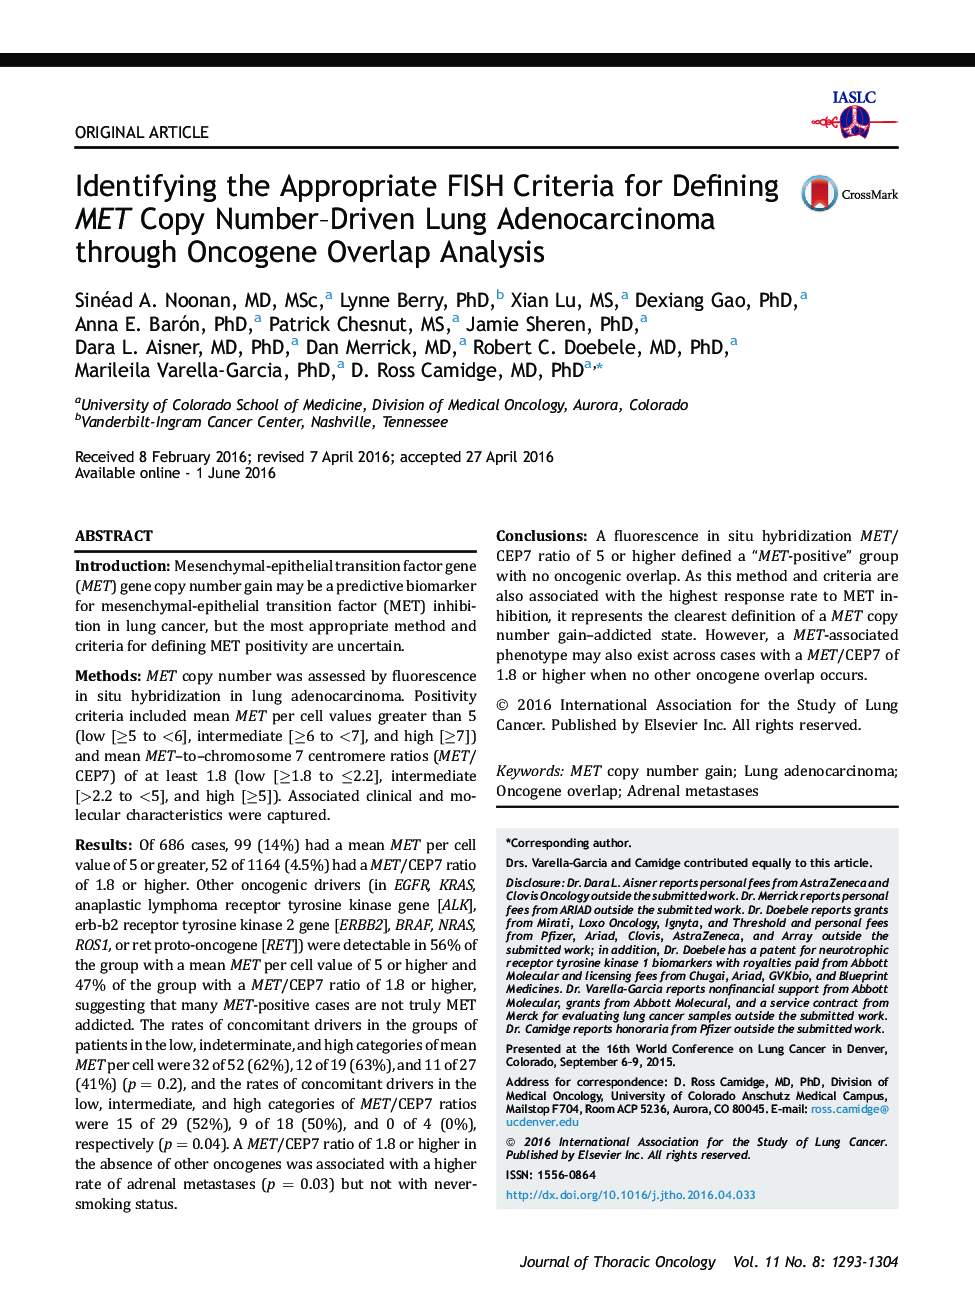 Original ArticleTranslational OncologyIdentifying the Appropriate FISH Criteria for Defining MET Copy Number-Driven Lung Adenocarcinoma through Oncogene Overlap Analysis